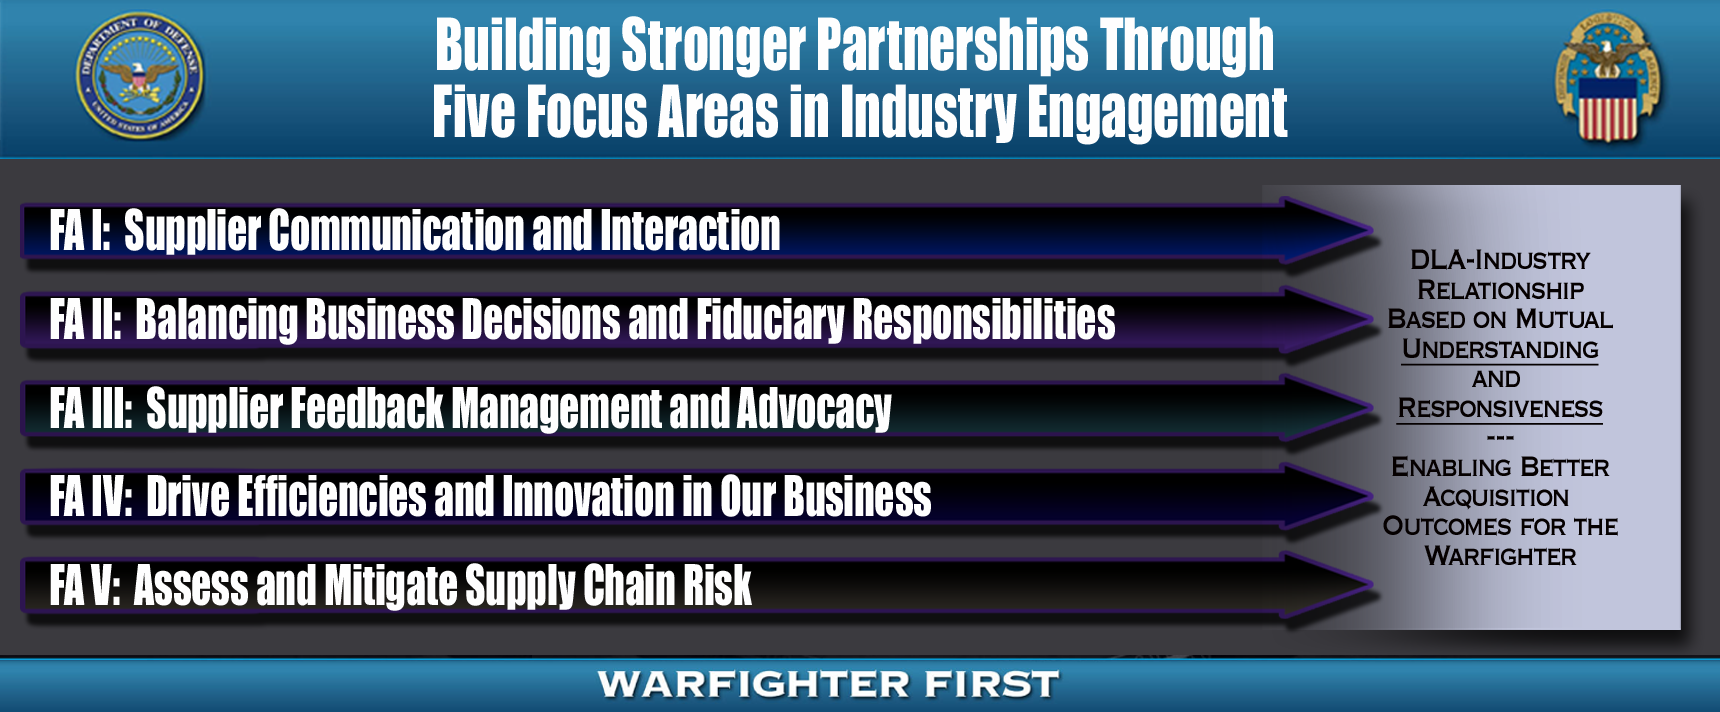 Building Stronger Partnerships through Five Focus Areas in Industry Engagement